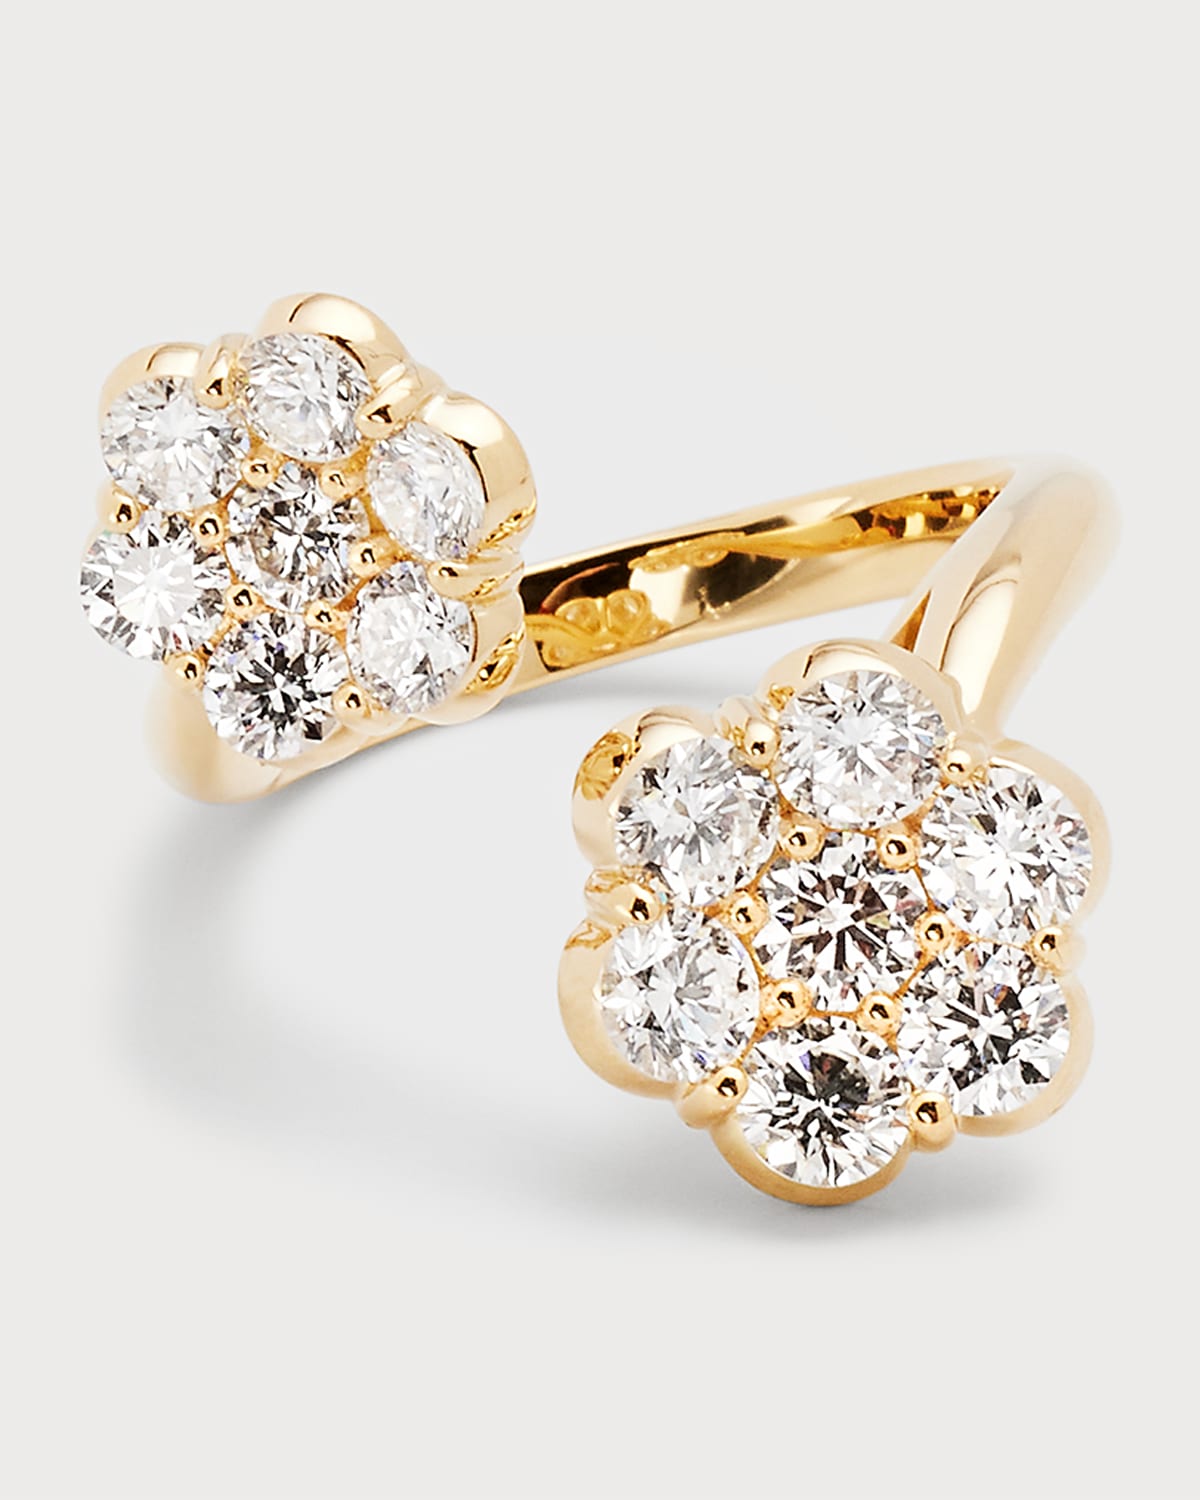 18k Yellow Gold Flower Diamond Bypass Ring, Size 6 and 7